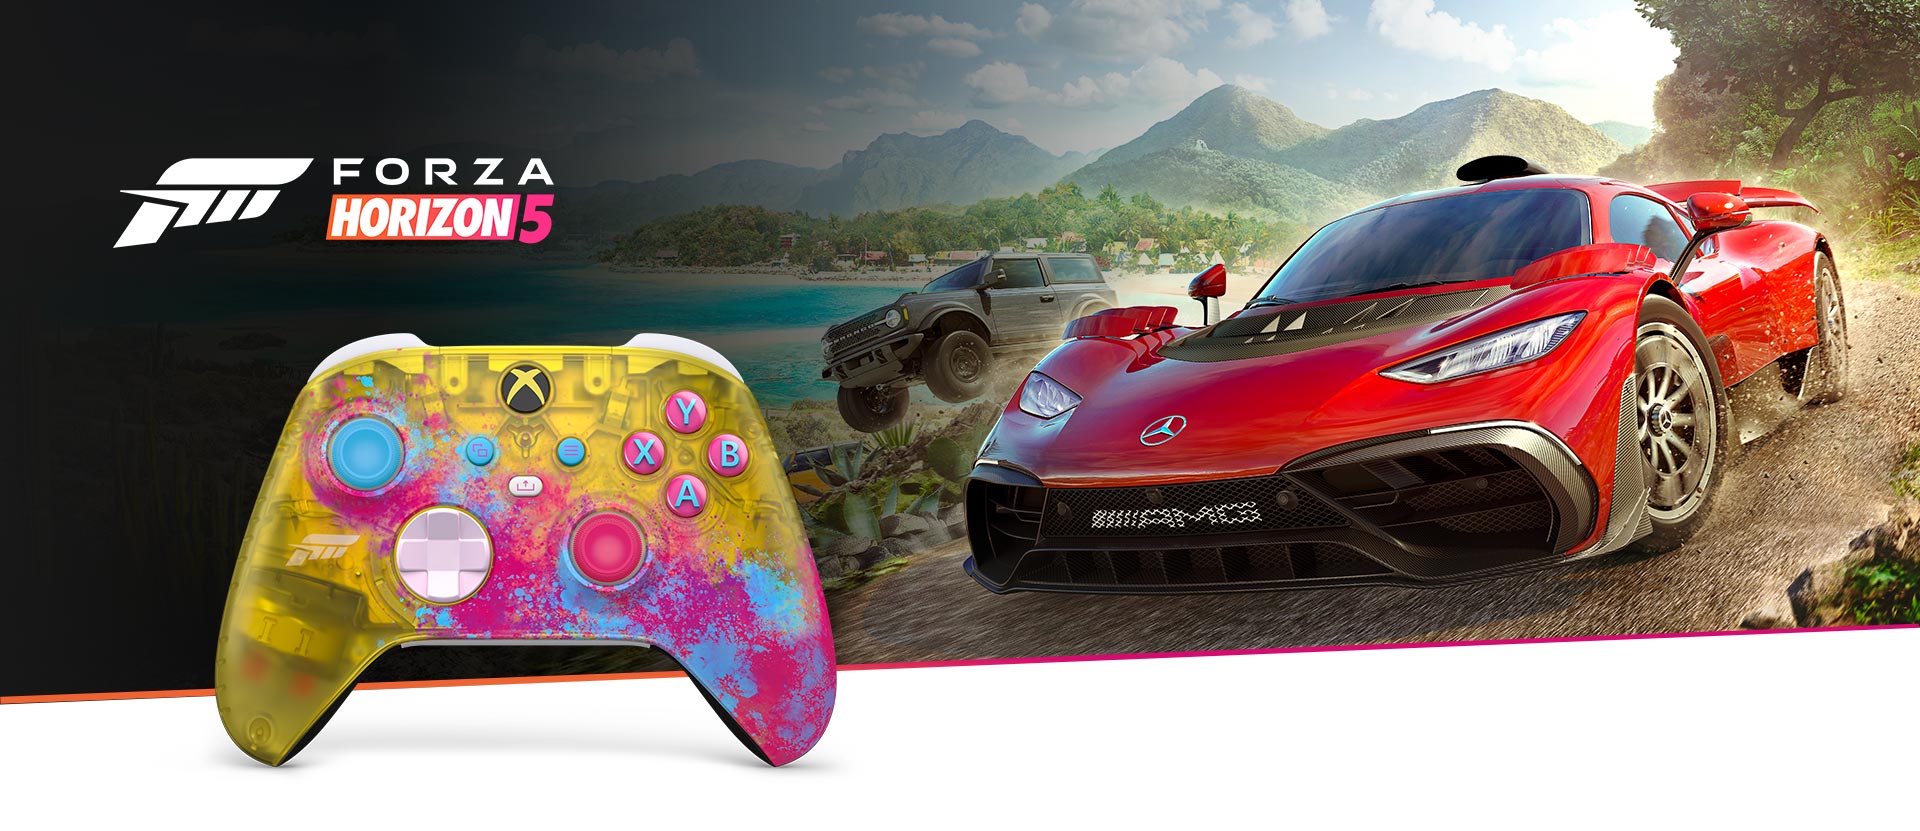 Monica Motel erektion Forza Horizon 5 Cover Cars, Limited Edition Controller and Gameplay